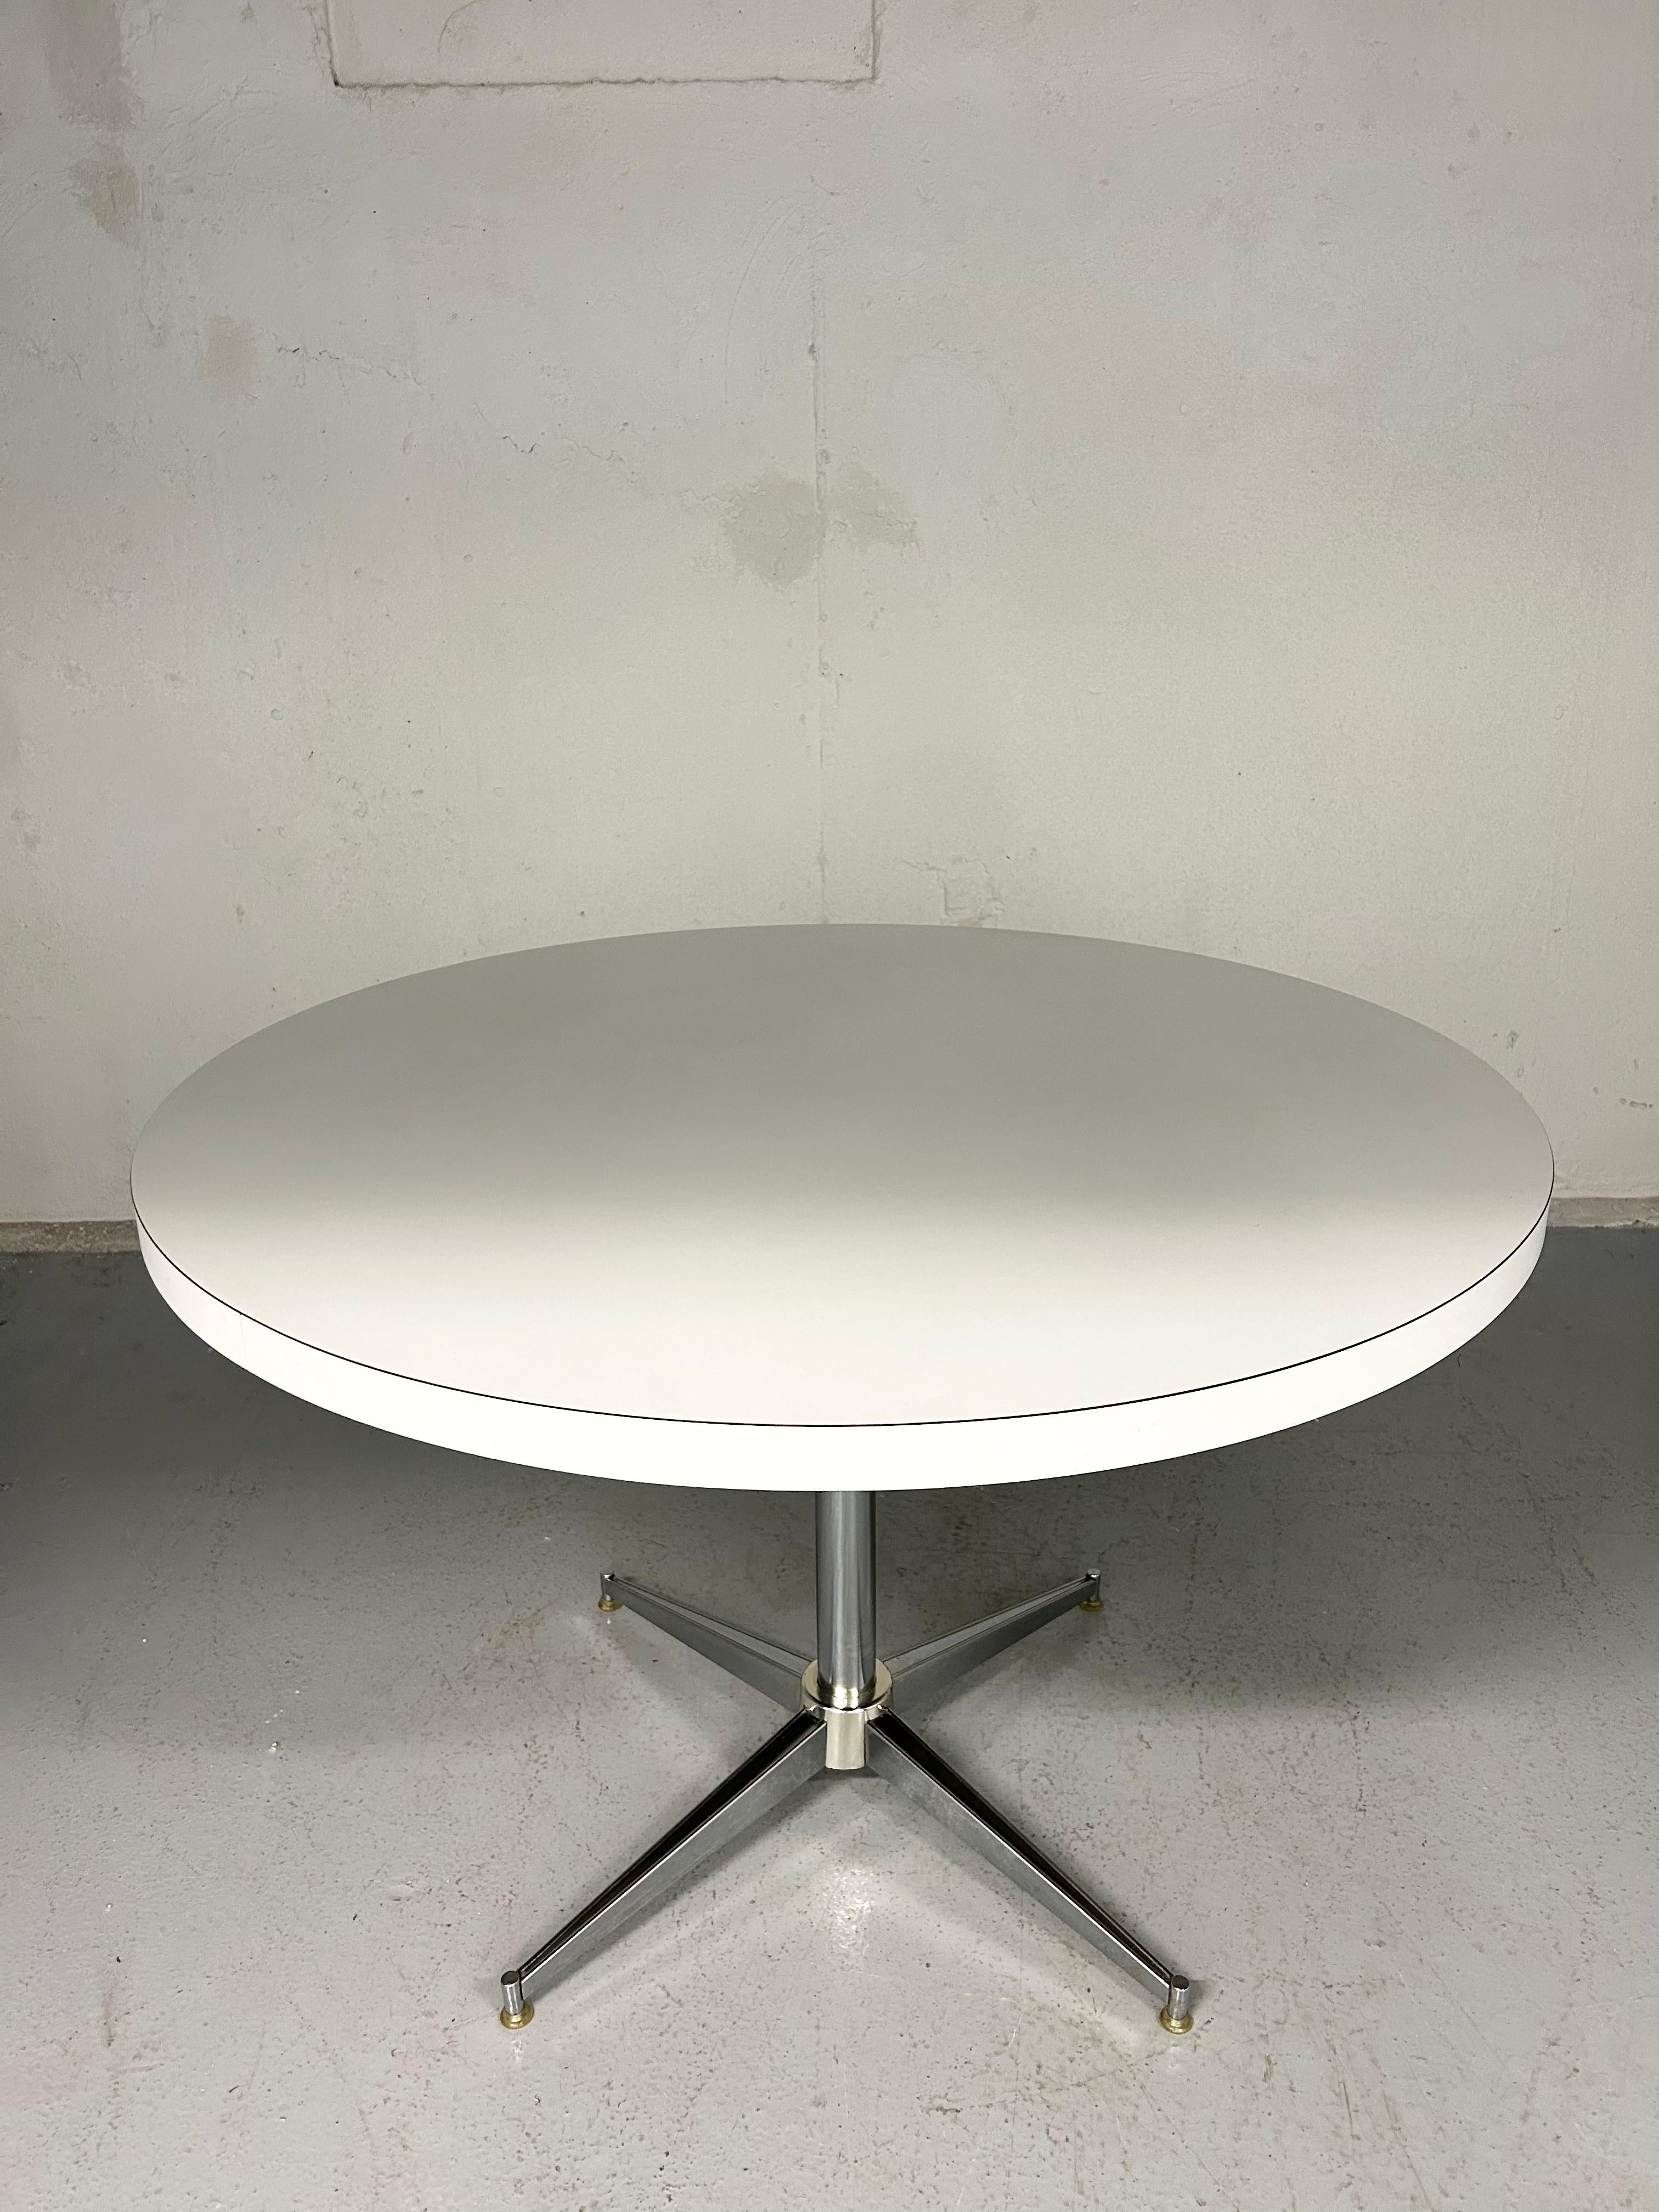 Vintage chrome pedestal dining table. Round white laminate top. Chrome base. No chips in the laminate, no rust on the chrome. Minimal wear.